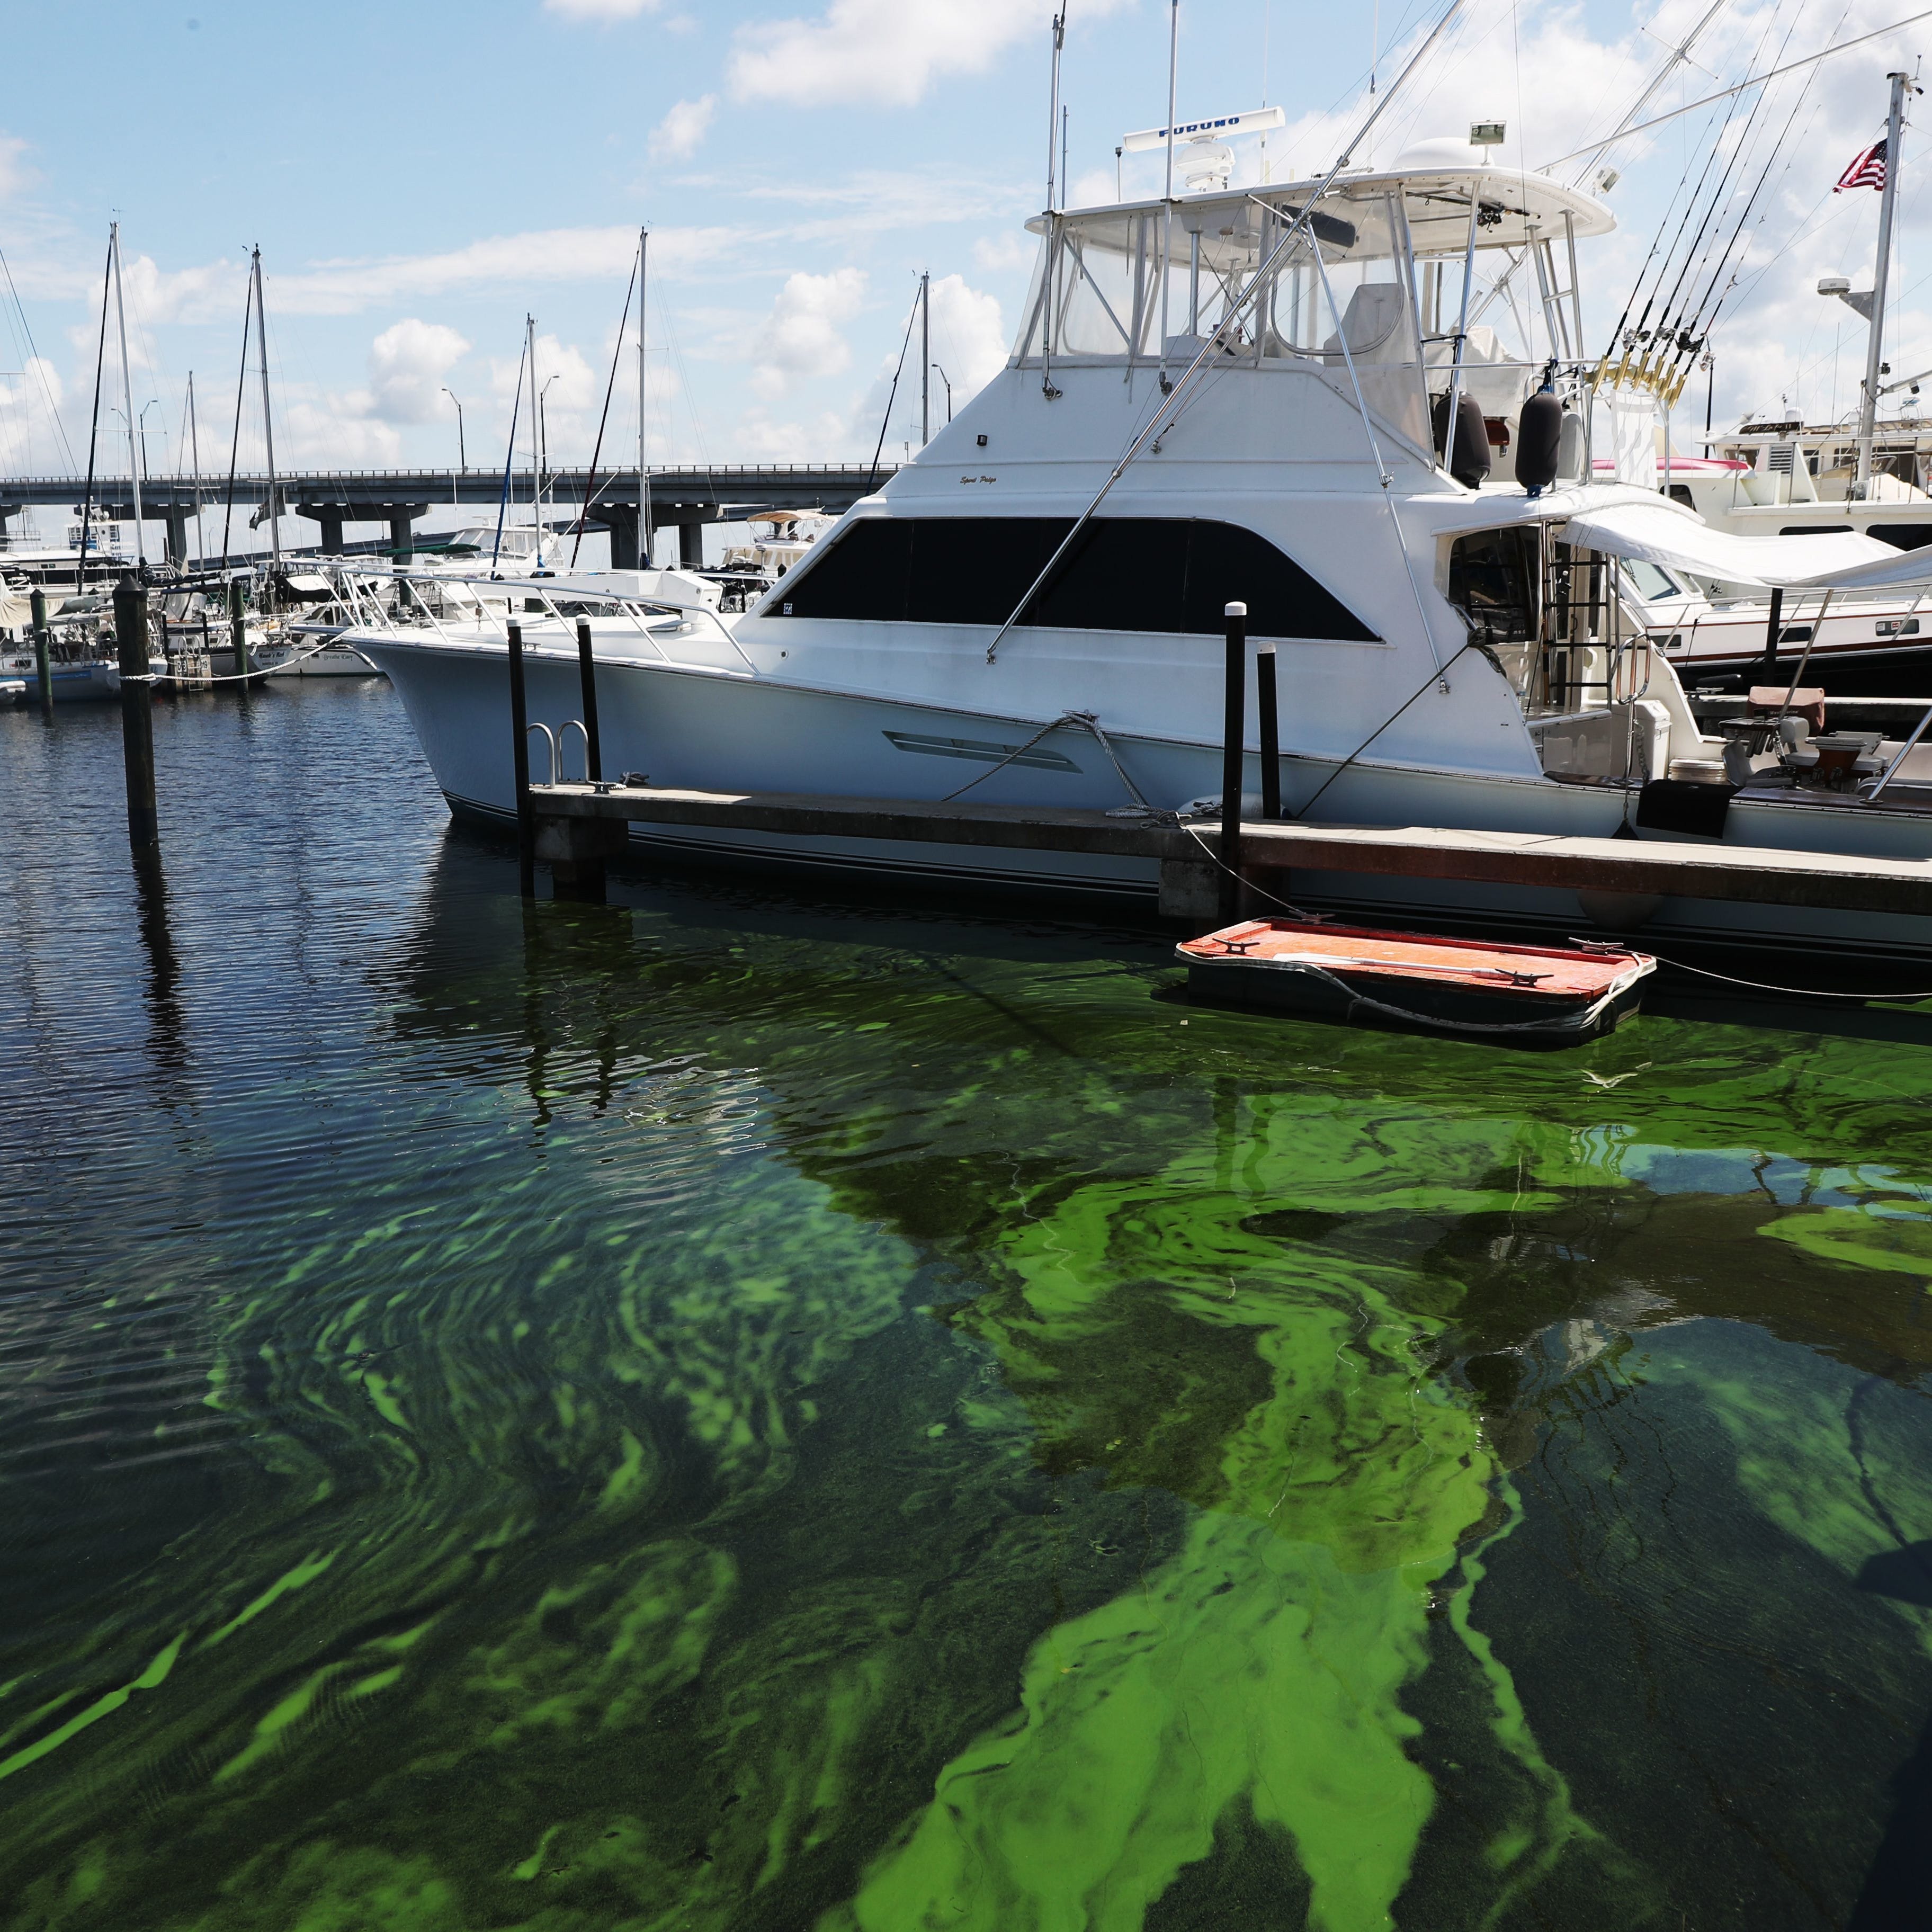 Algae builds up at the Fort Myers Yacht Basin. Recent algae blooms are starting to move west down the Caloosahatchee River. U.S. Senator Bill Nelson met with water advocates and elected officials to discuss the water quality.